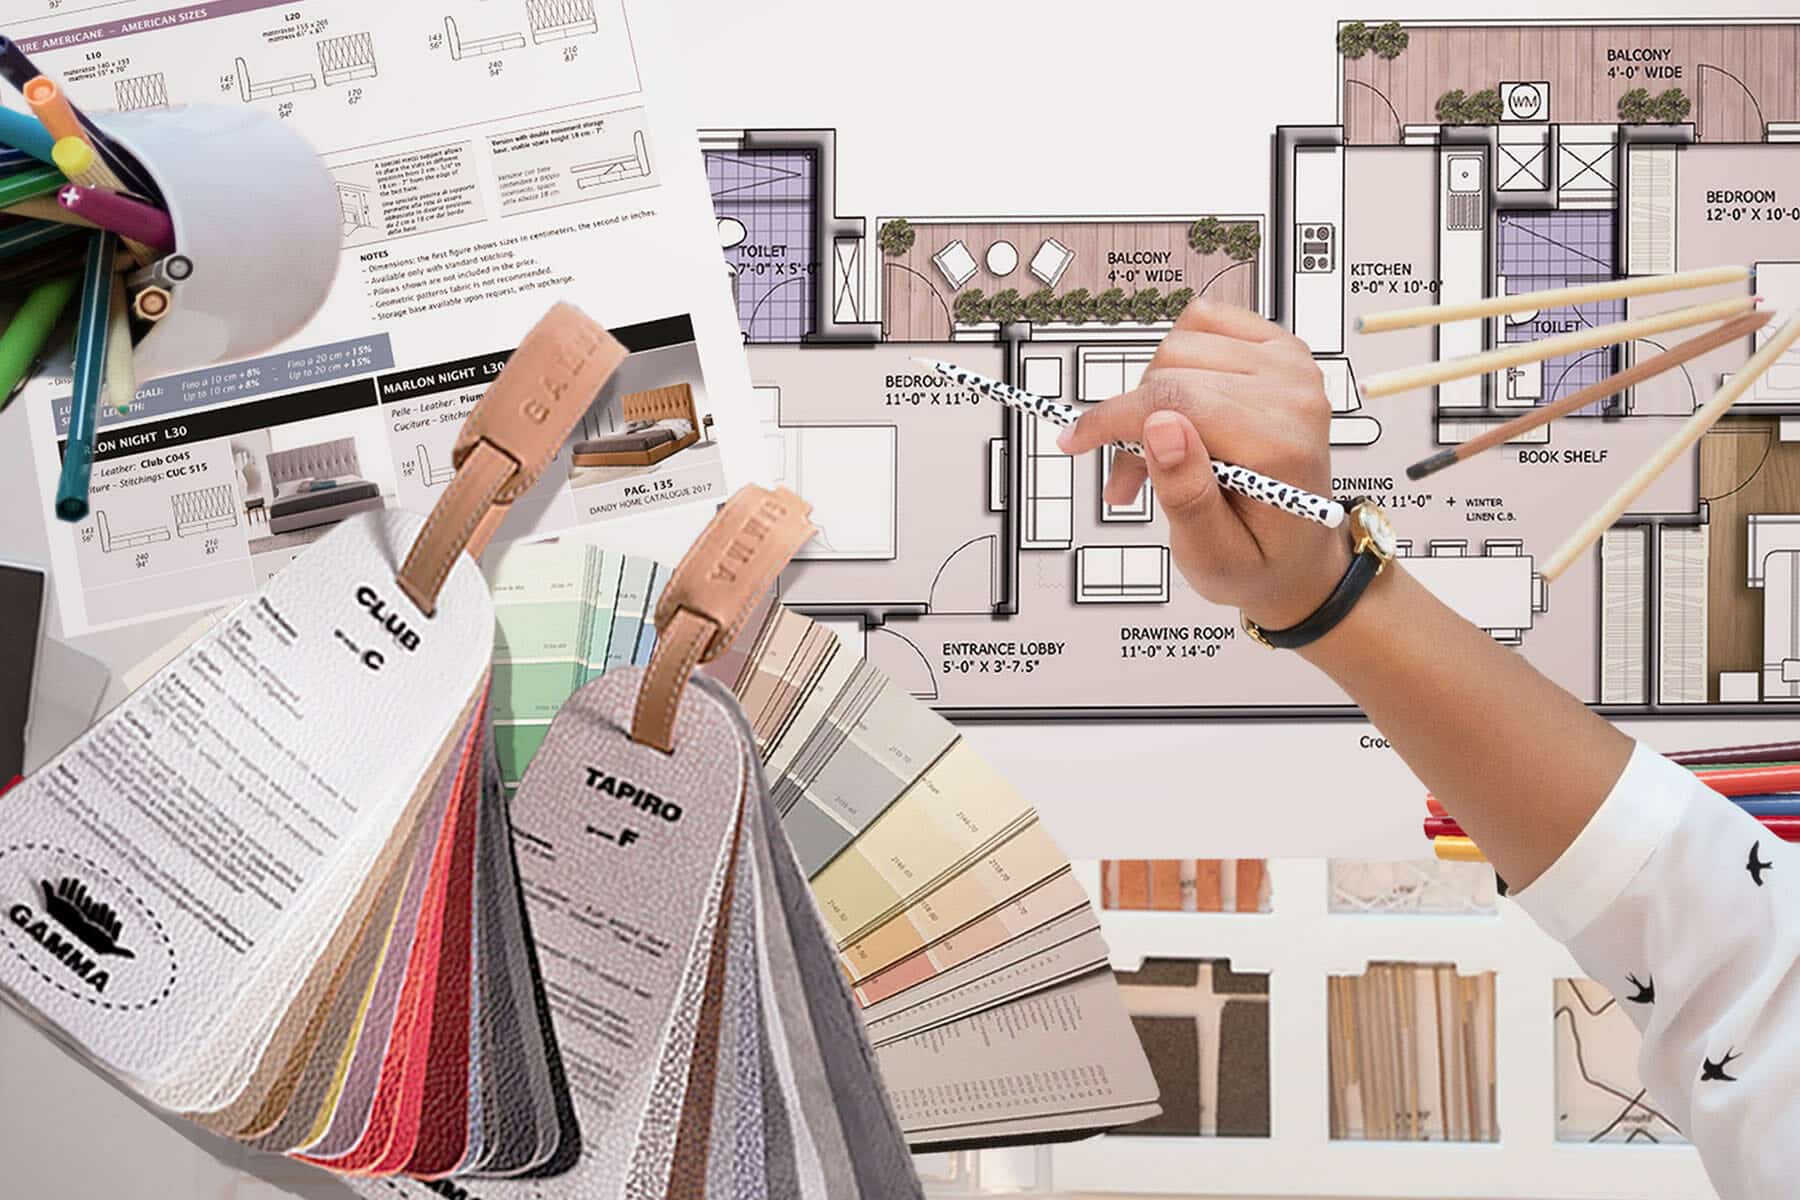 Interior Design Blueprints, Color Swatches, and colored markers